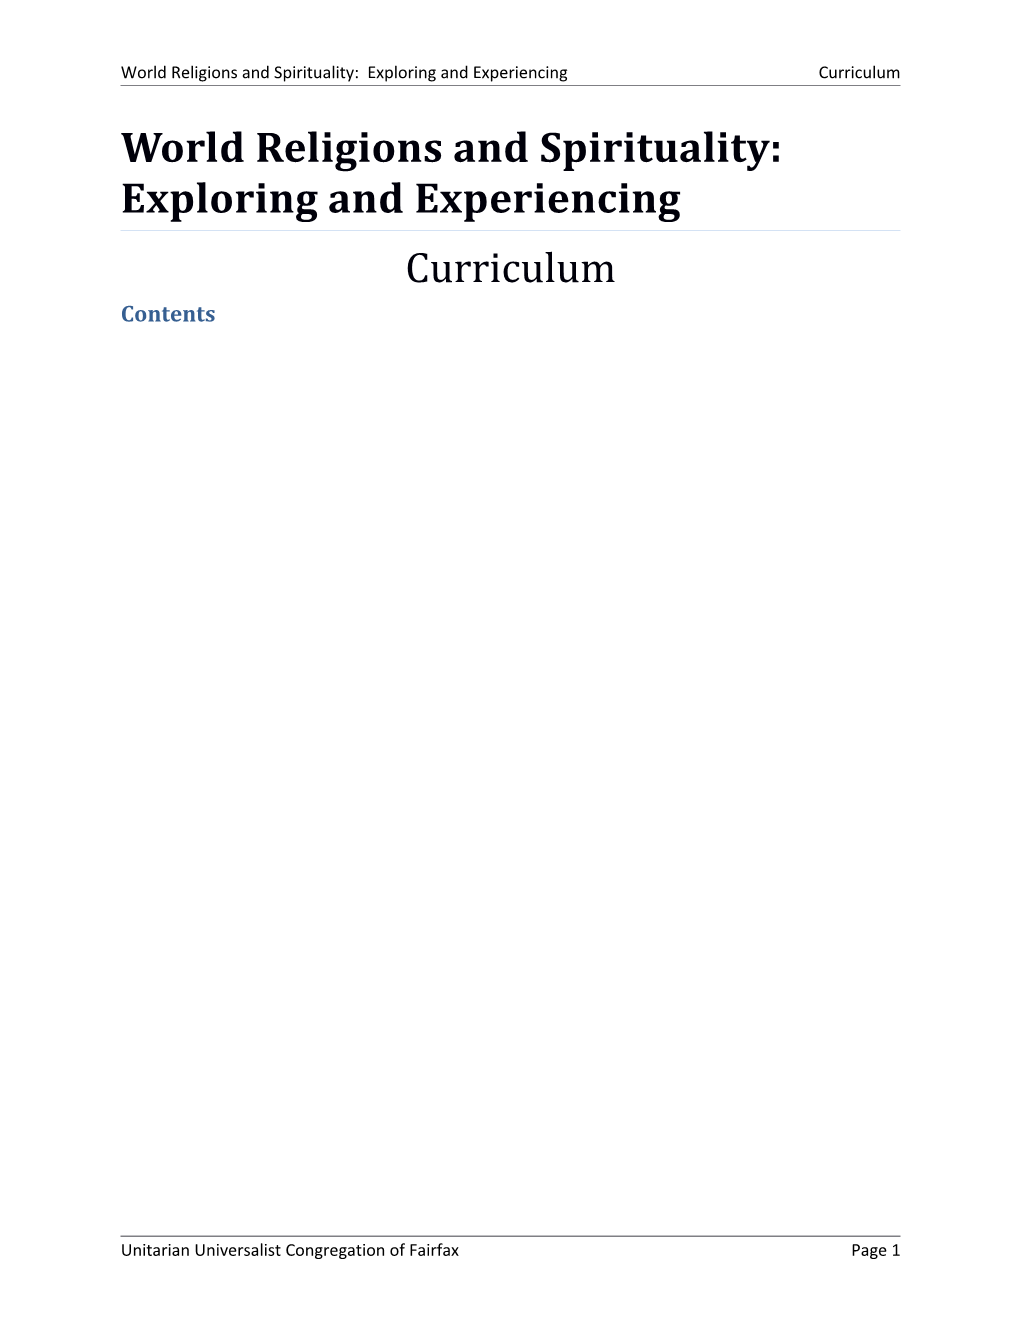 World Religions and Spirituality: Exploring and Experiencingcurriculum